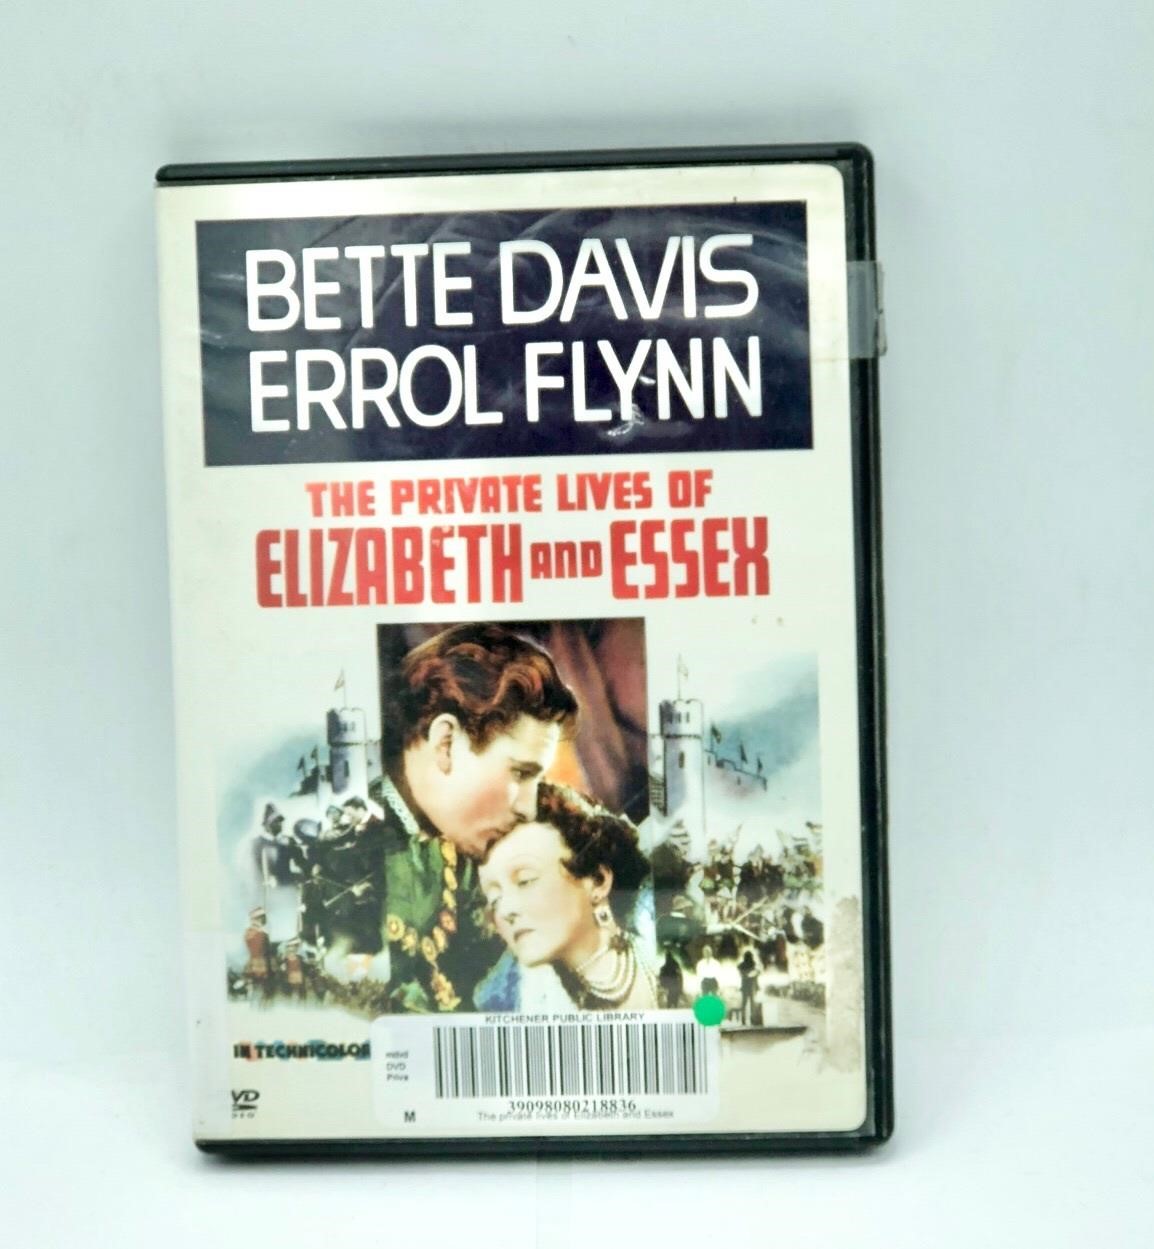 The Private Lives Of Elizabeth and Essex DVD